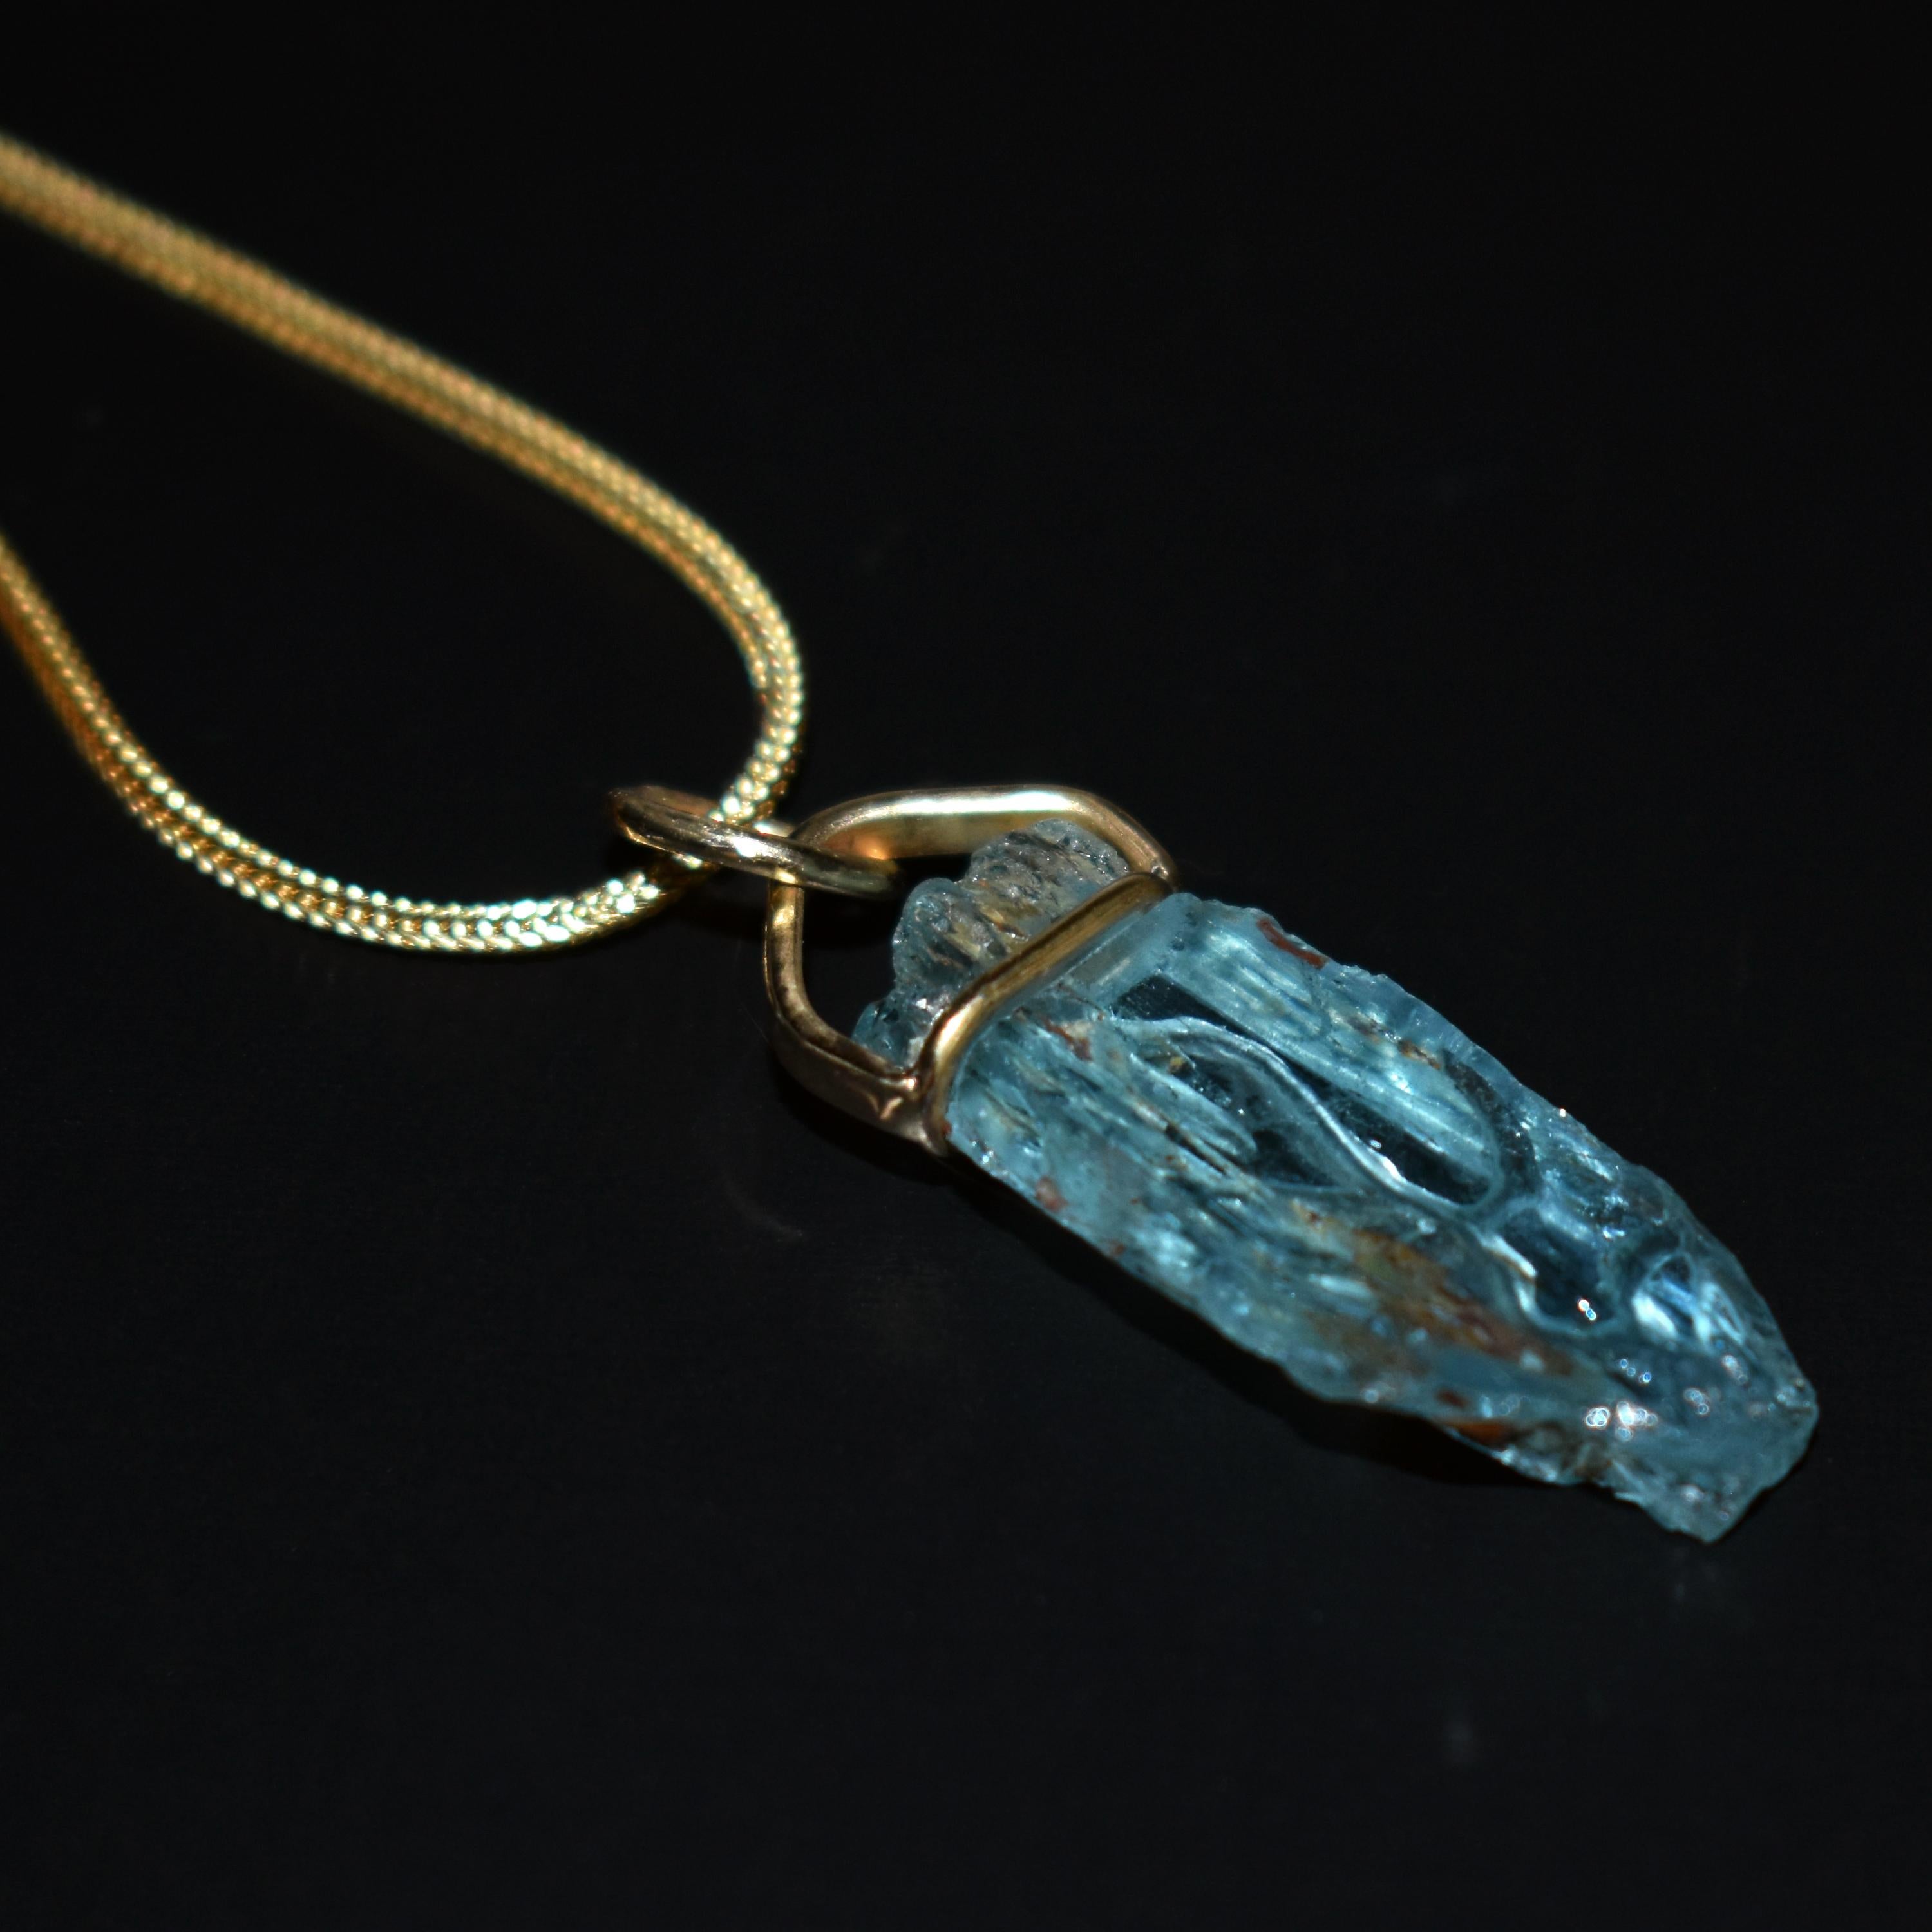 Beautiful hand-carved, rough Aquamarine crystal and 18k yellow gold pendant on a 16 inch 18k gold foxtail chain necklace. Pendant, including bail, is 1.5 inches or 38mm in length. Gorgeous, carved vine design in this Aquamarine gemstone pendant